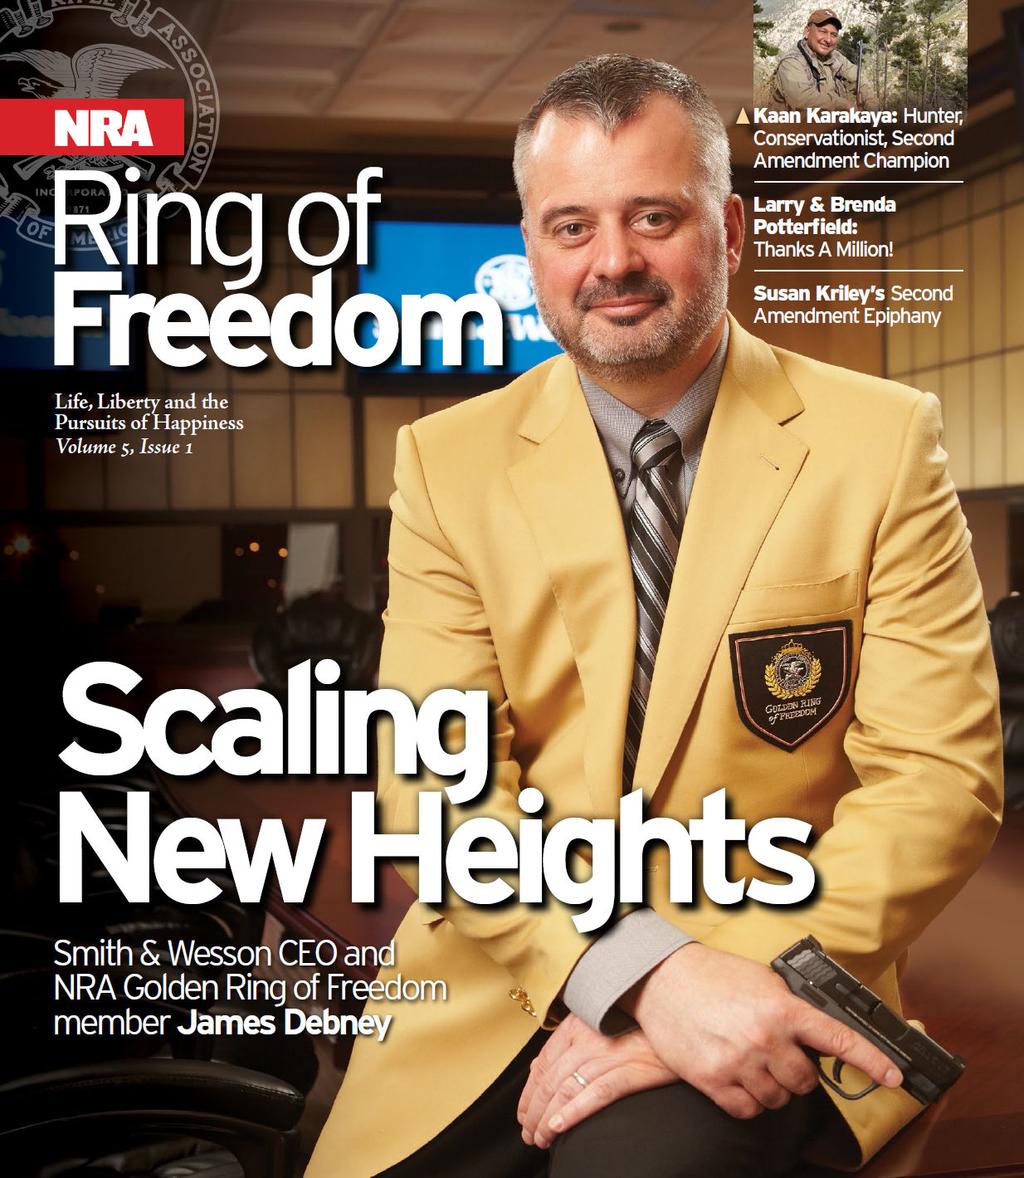 Smith & Wesson CEO James Debney on the cover of